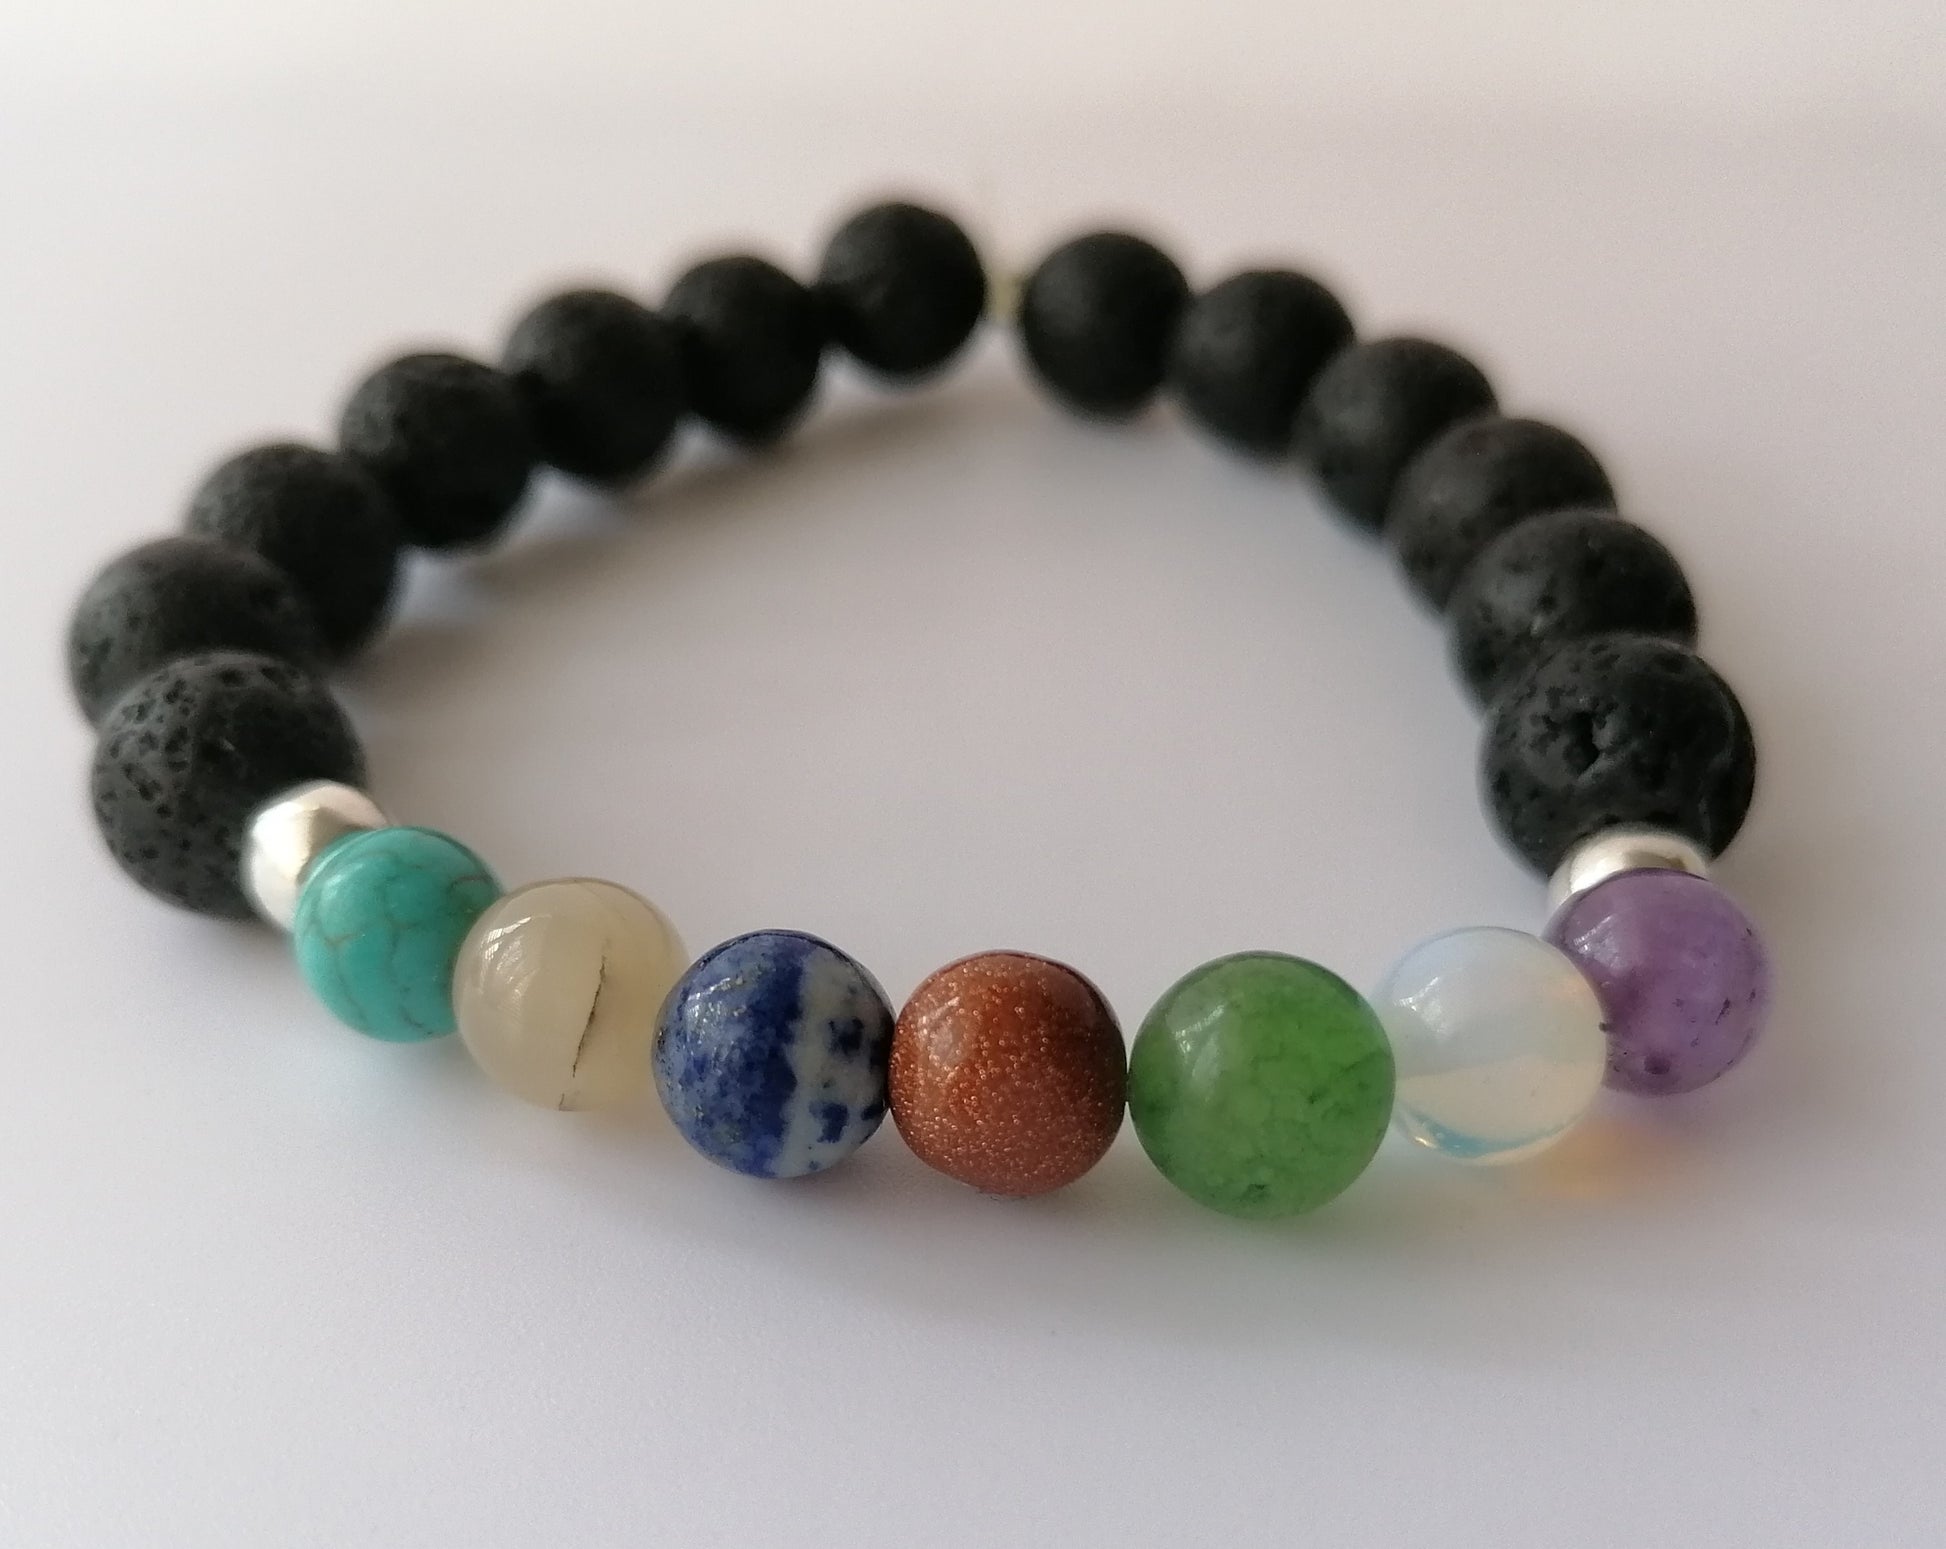 7 Chakra Bracelet with Lava Stone – The South African Desi